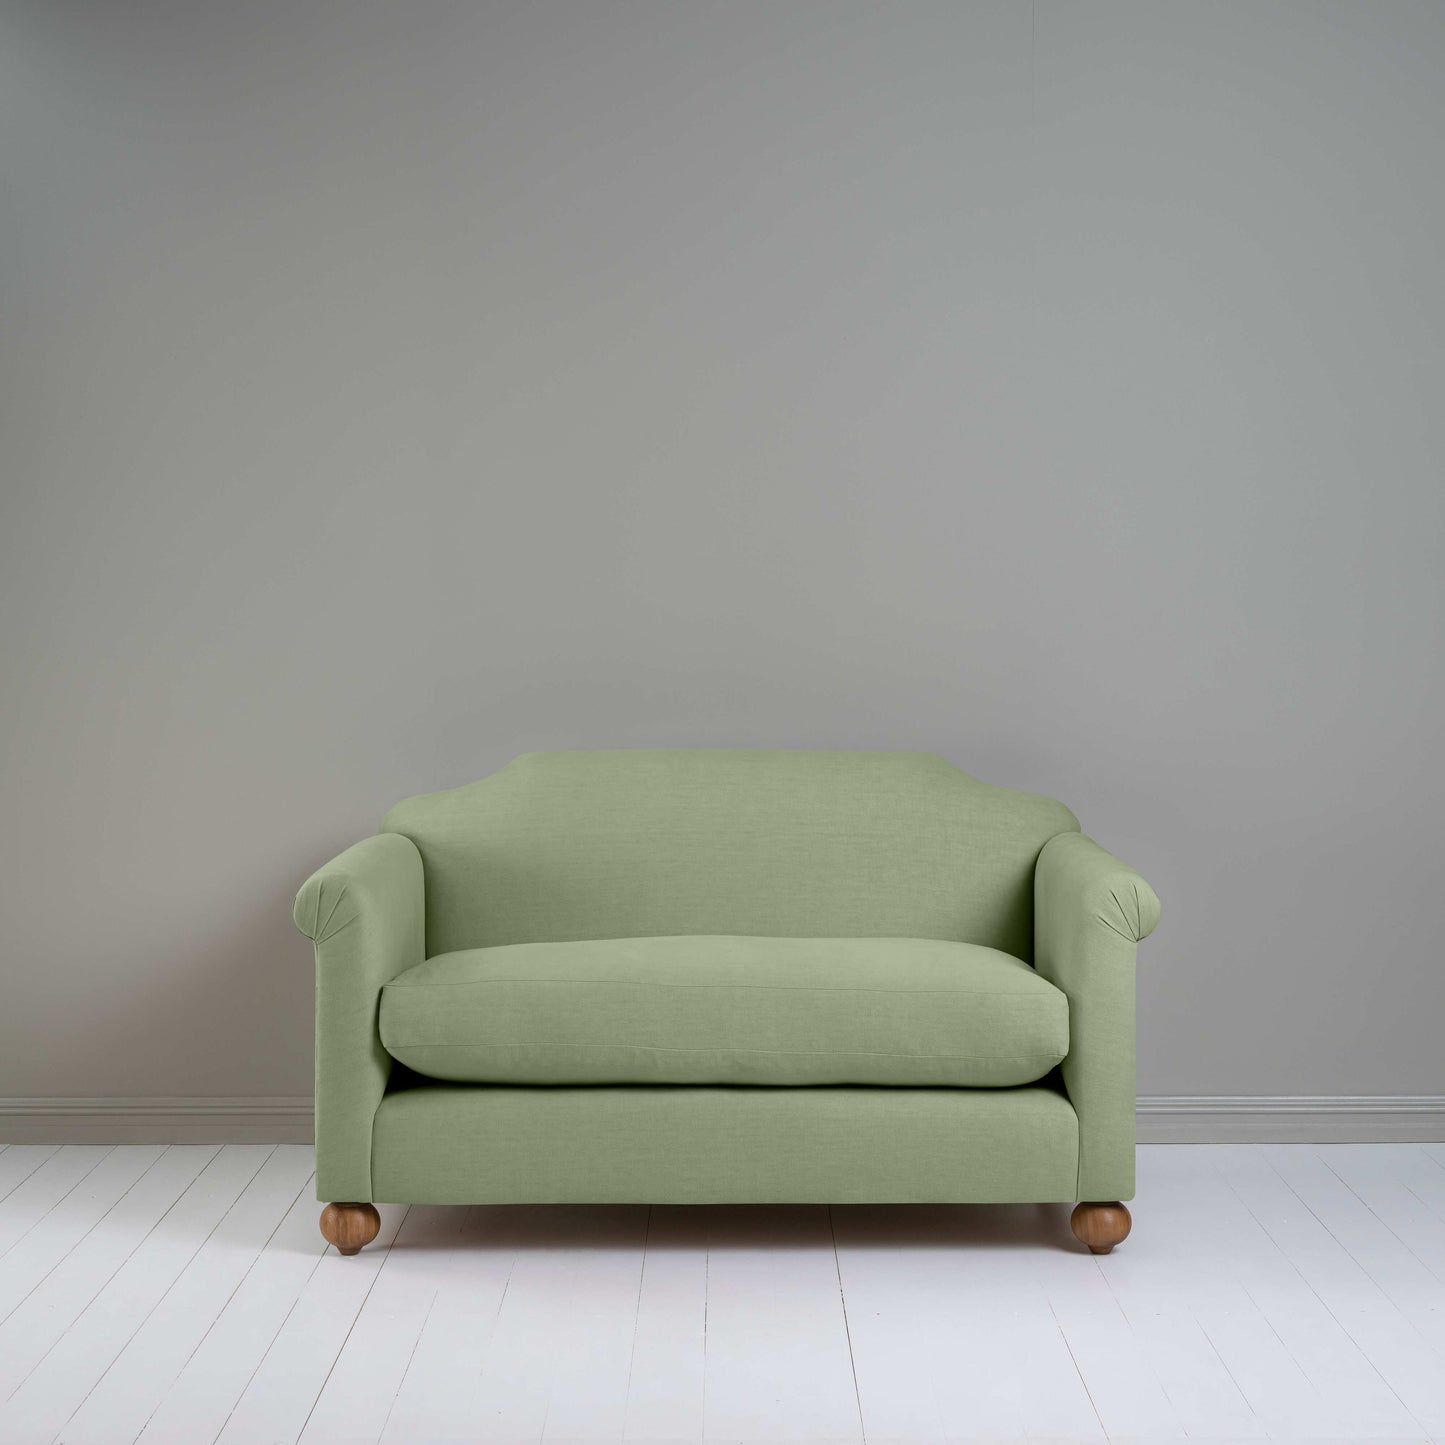 Dolittle 2 Seater Sofa in Laidback Linen Moss